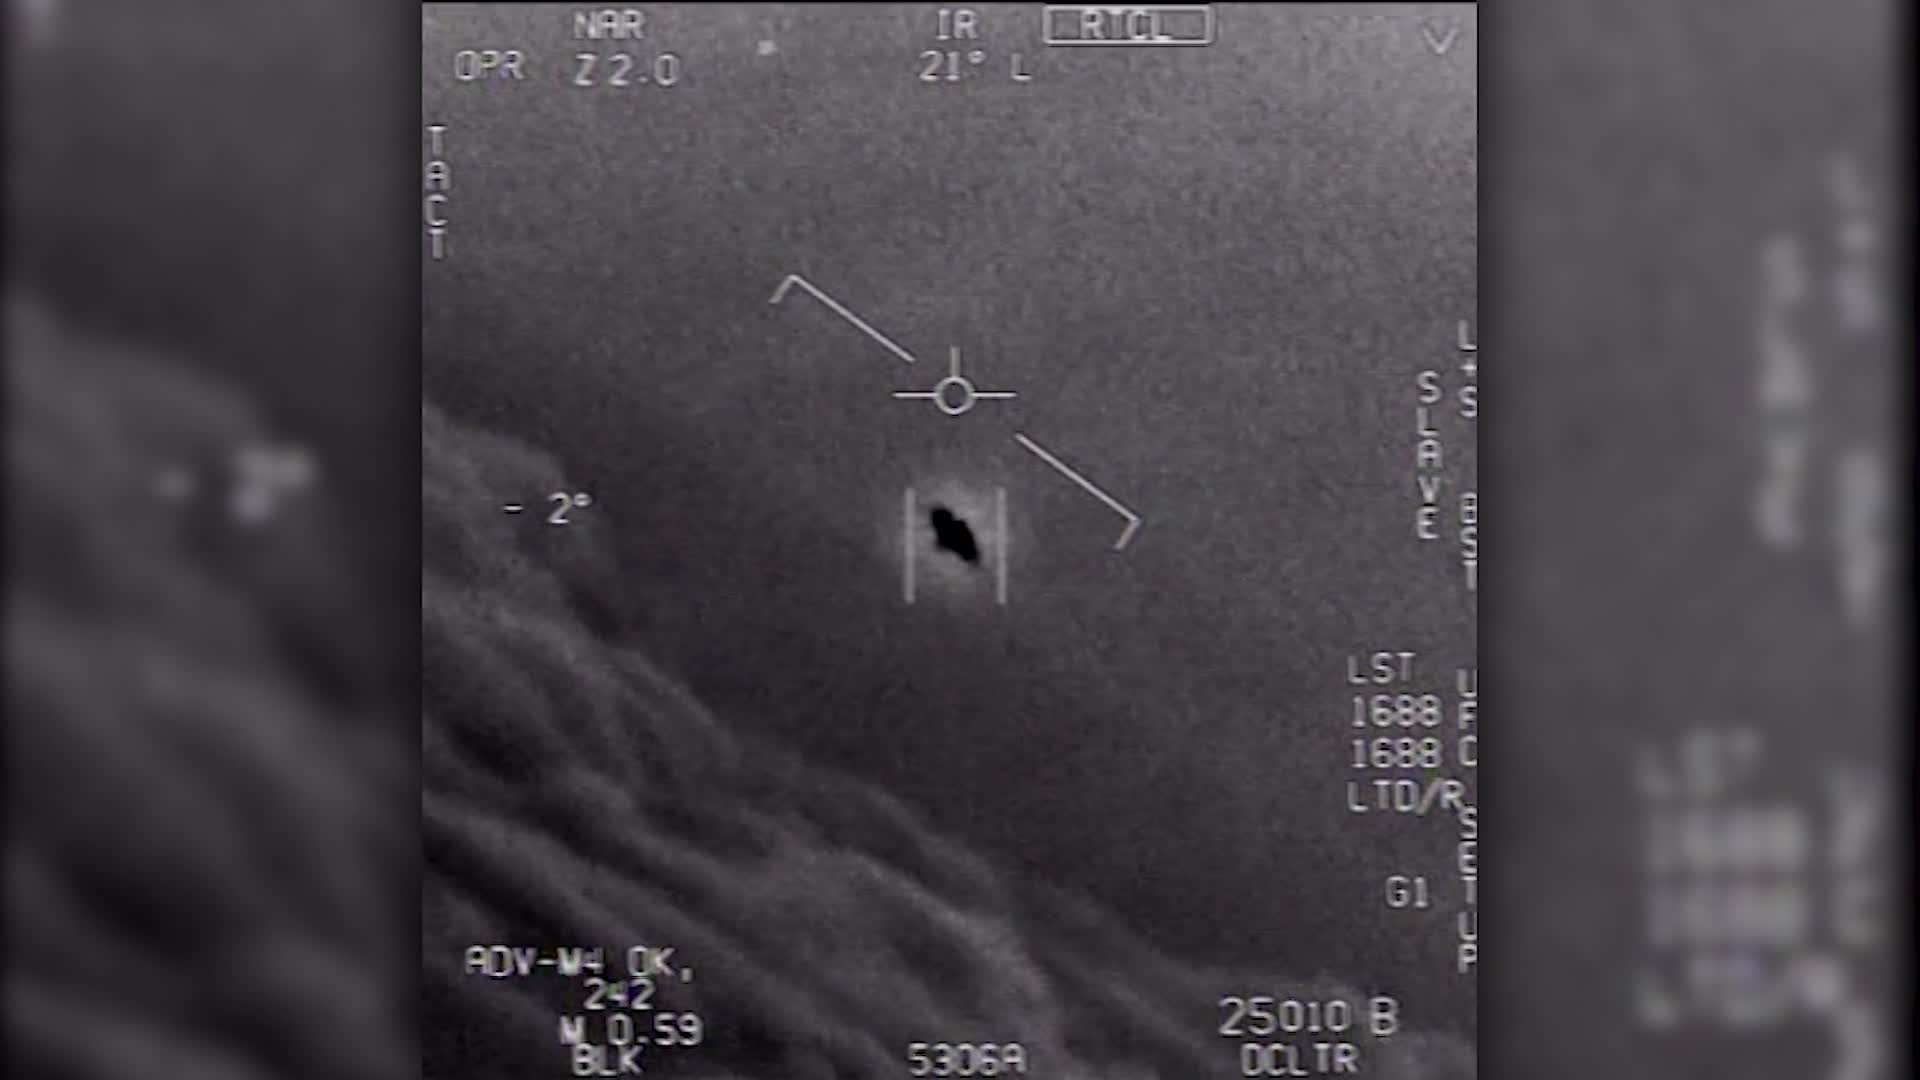 UFO report shows increase in number of sightings - CBS News